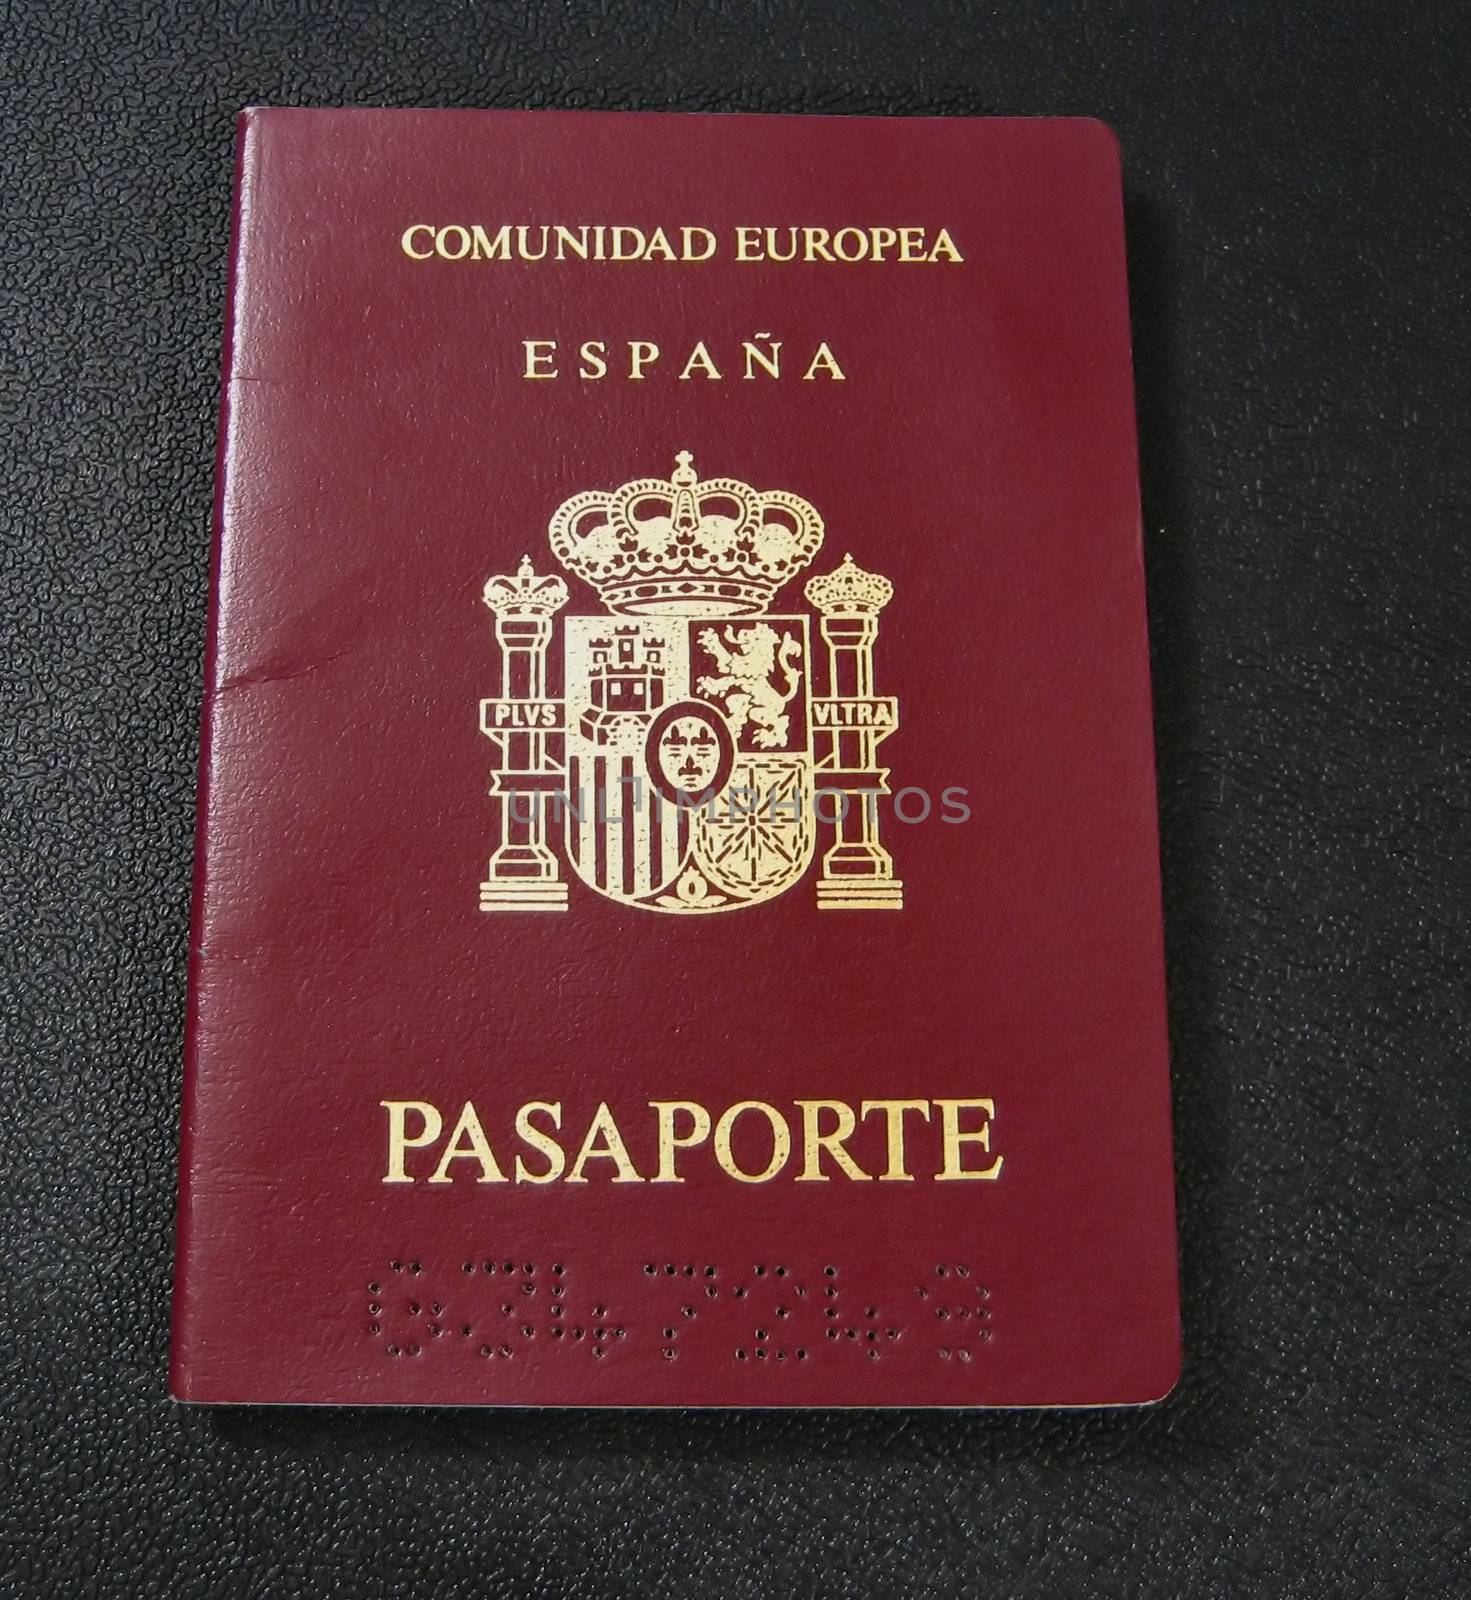 Passports and entrance visa for international travel and business